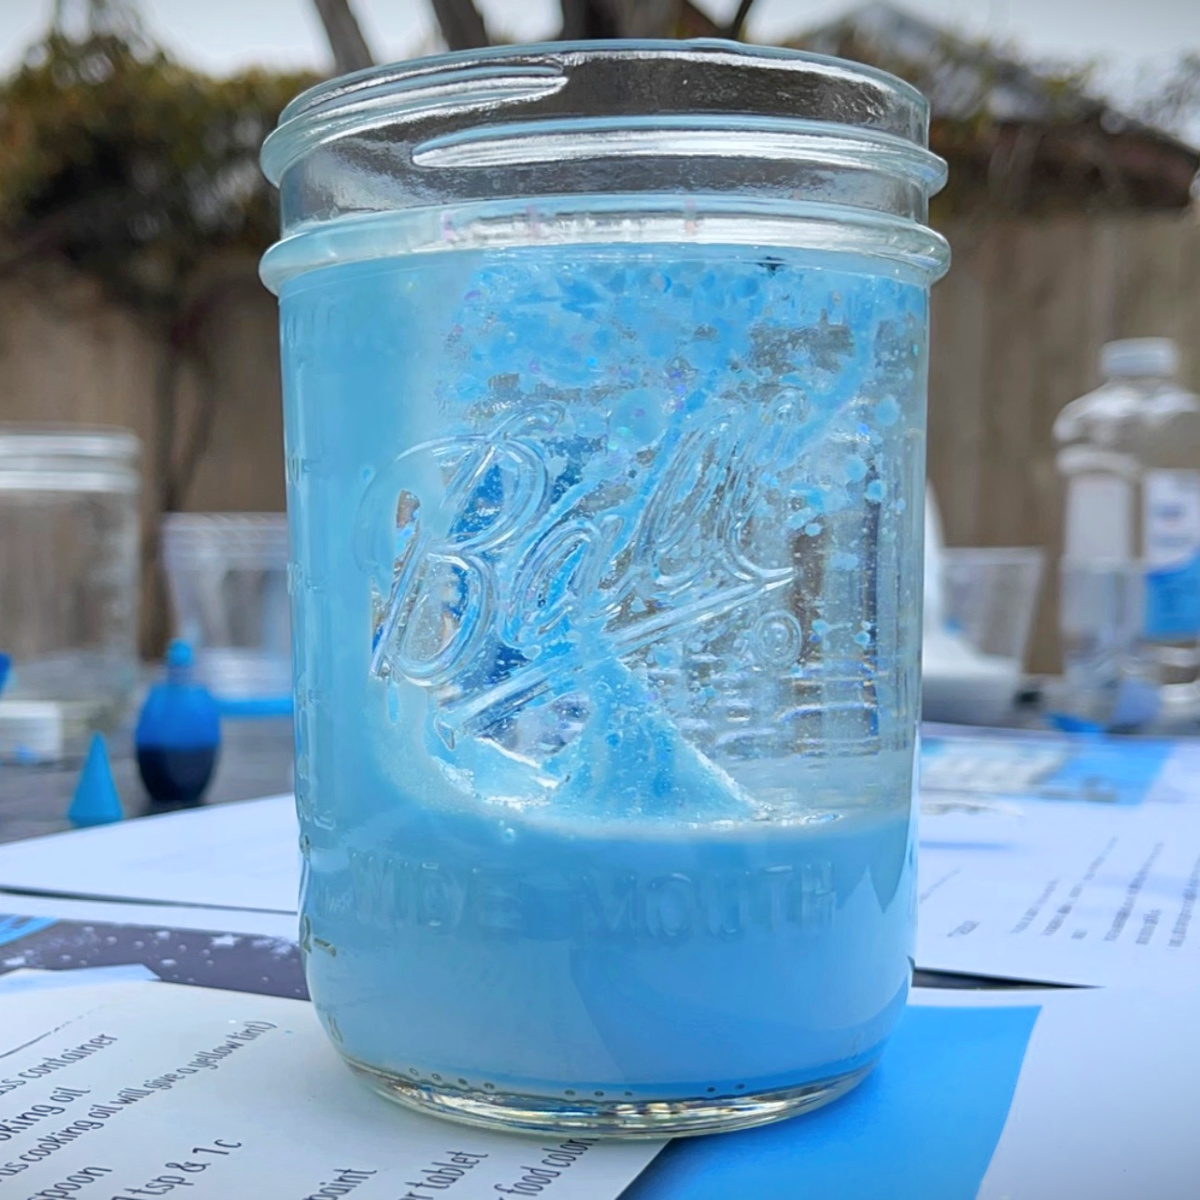 Snowstorm in a Bottle - Kitchen Chemistry at-home learning activity with Audrey Hagopian BASIS Charter Schools